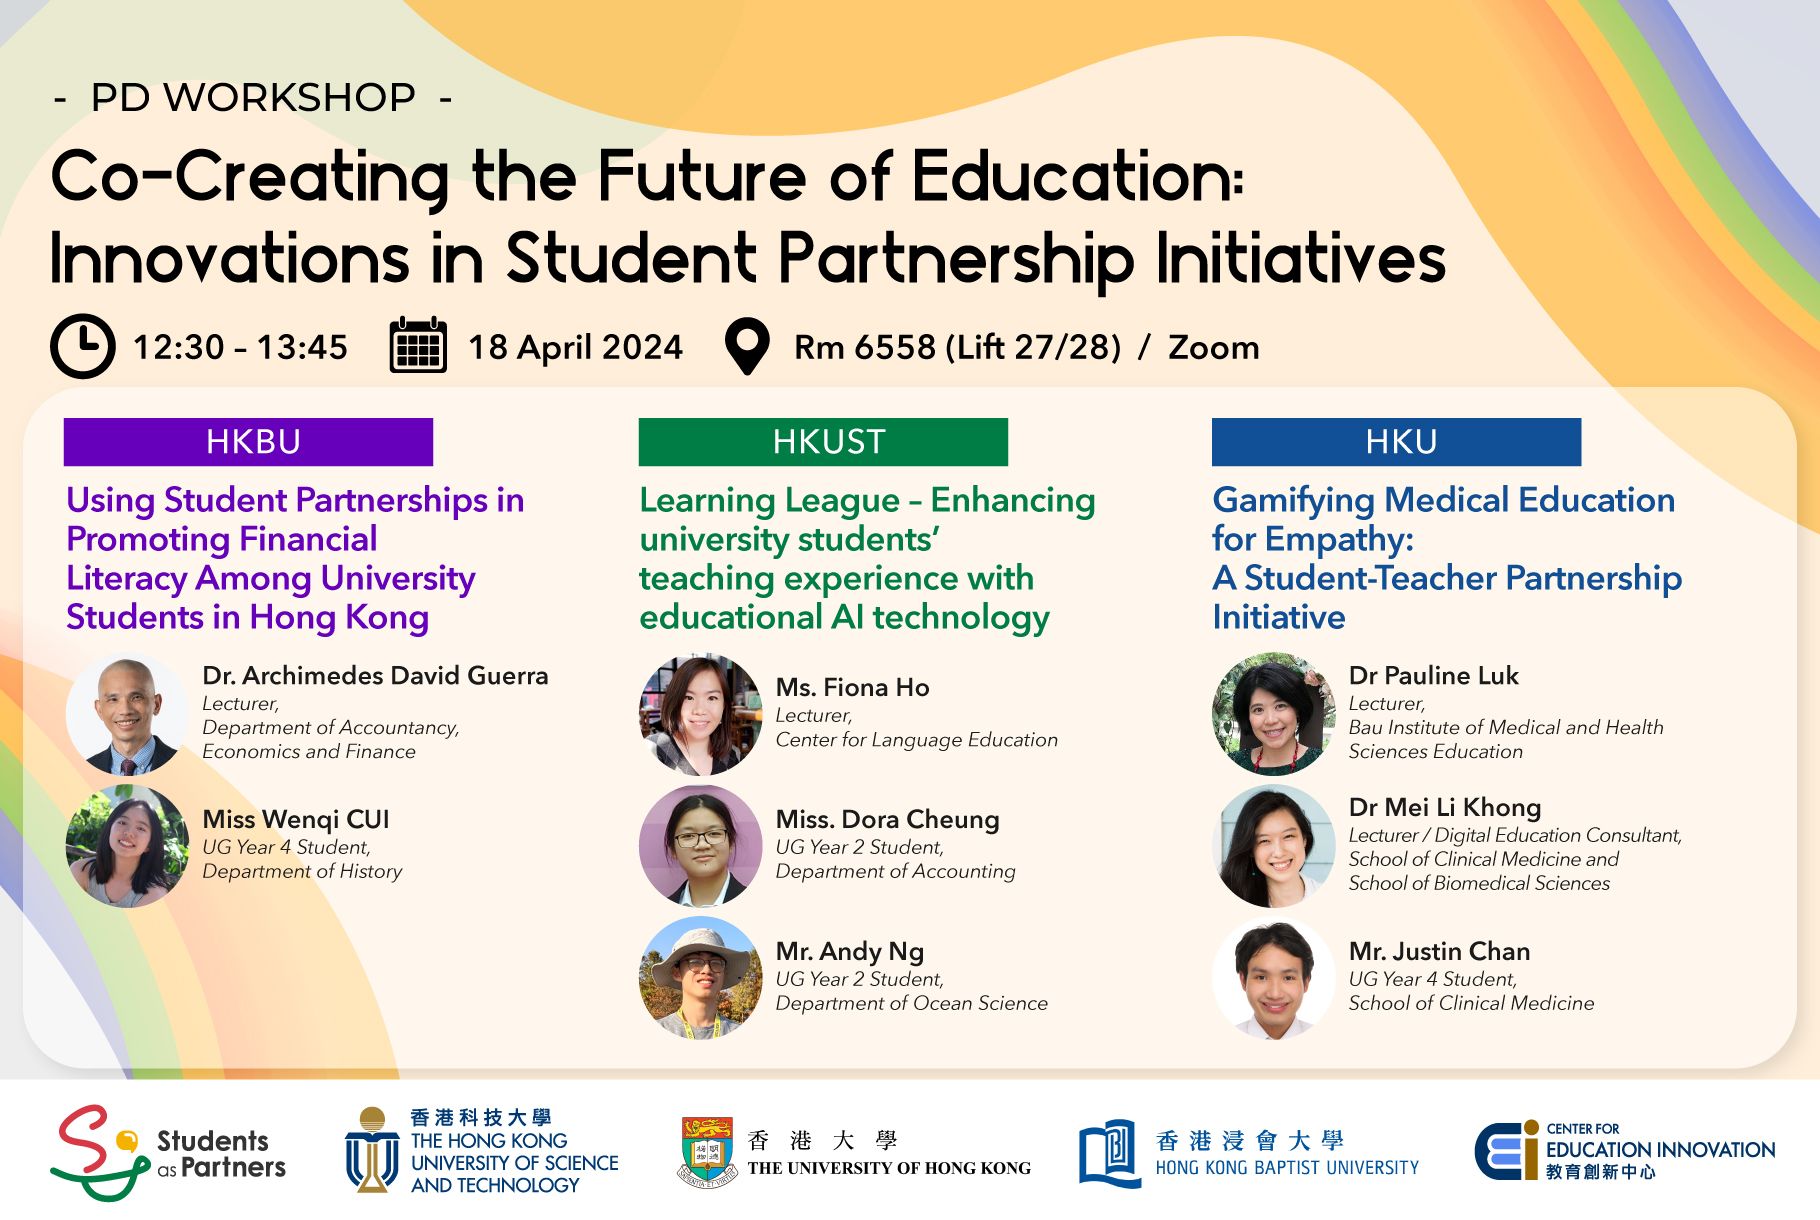 Co-Creating the Future of Education: Innovations in Student Partnership Initiatives